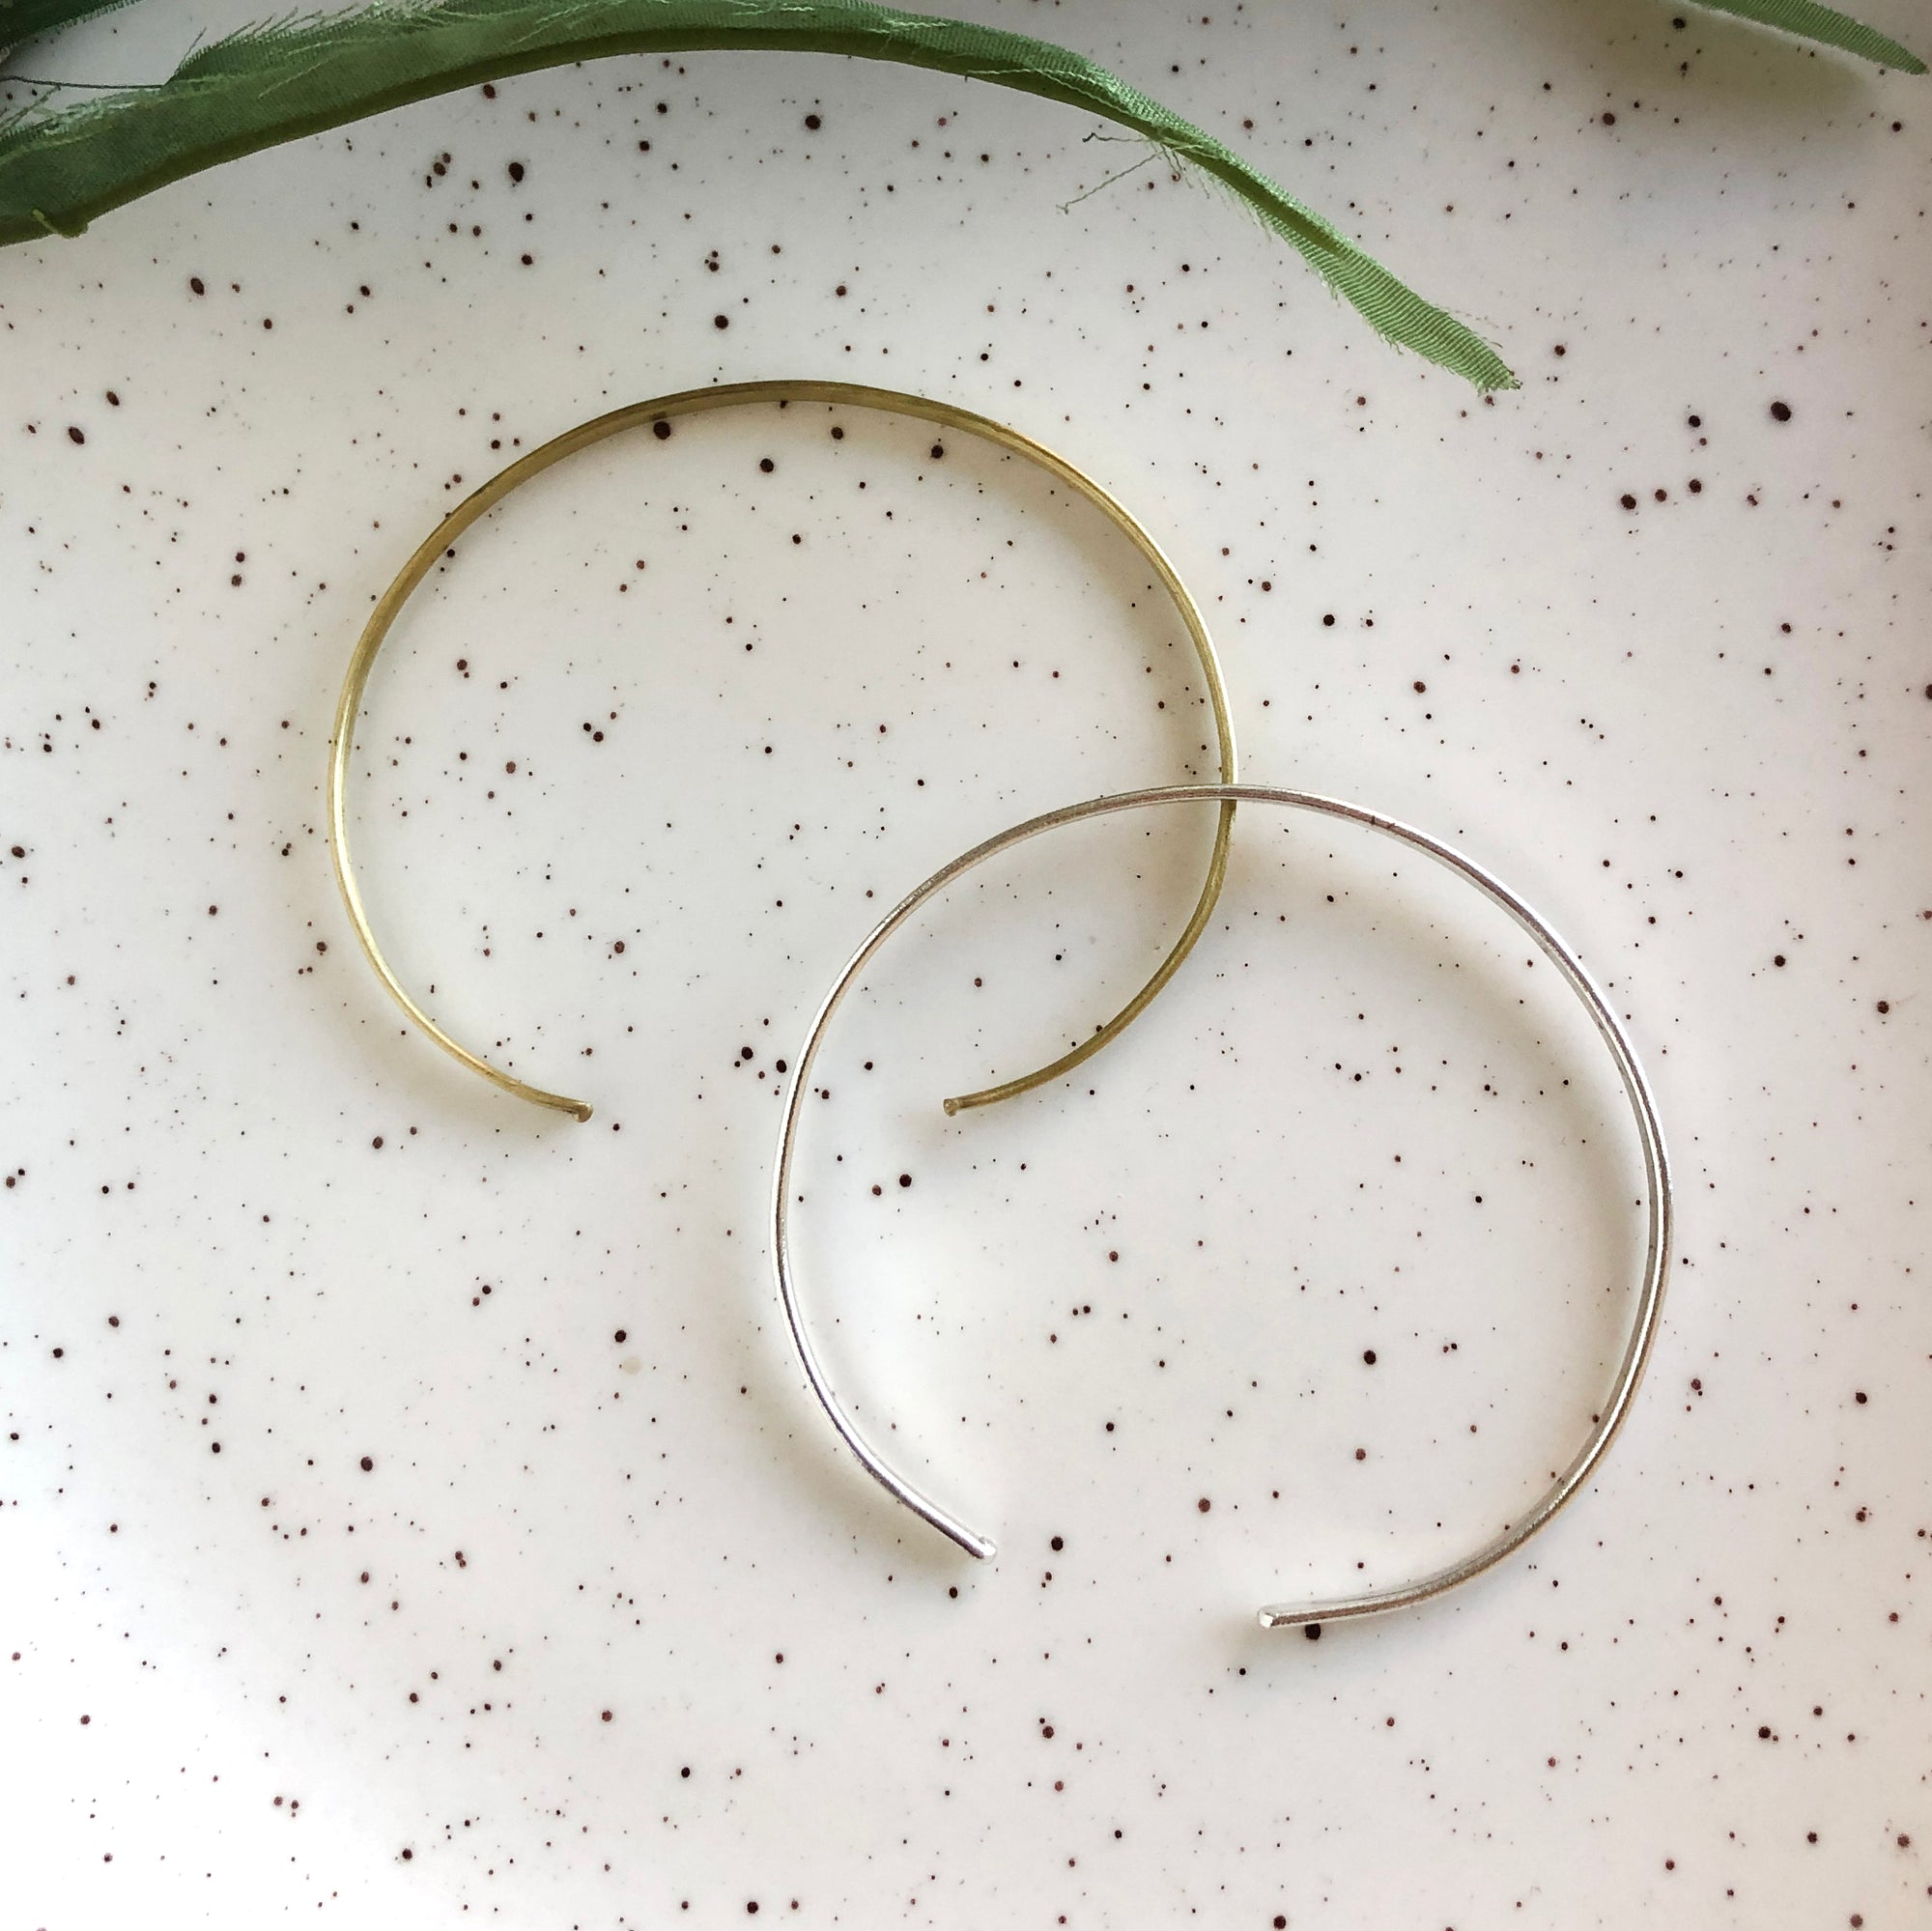 Simple Band Cuff- Sliver and Gold